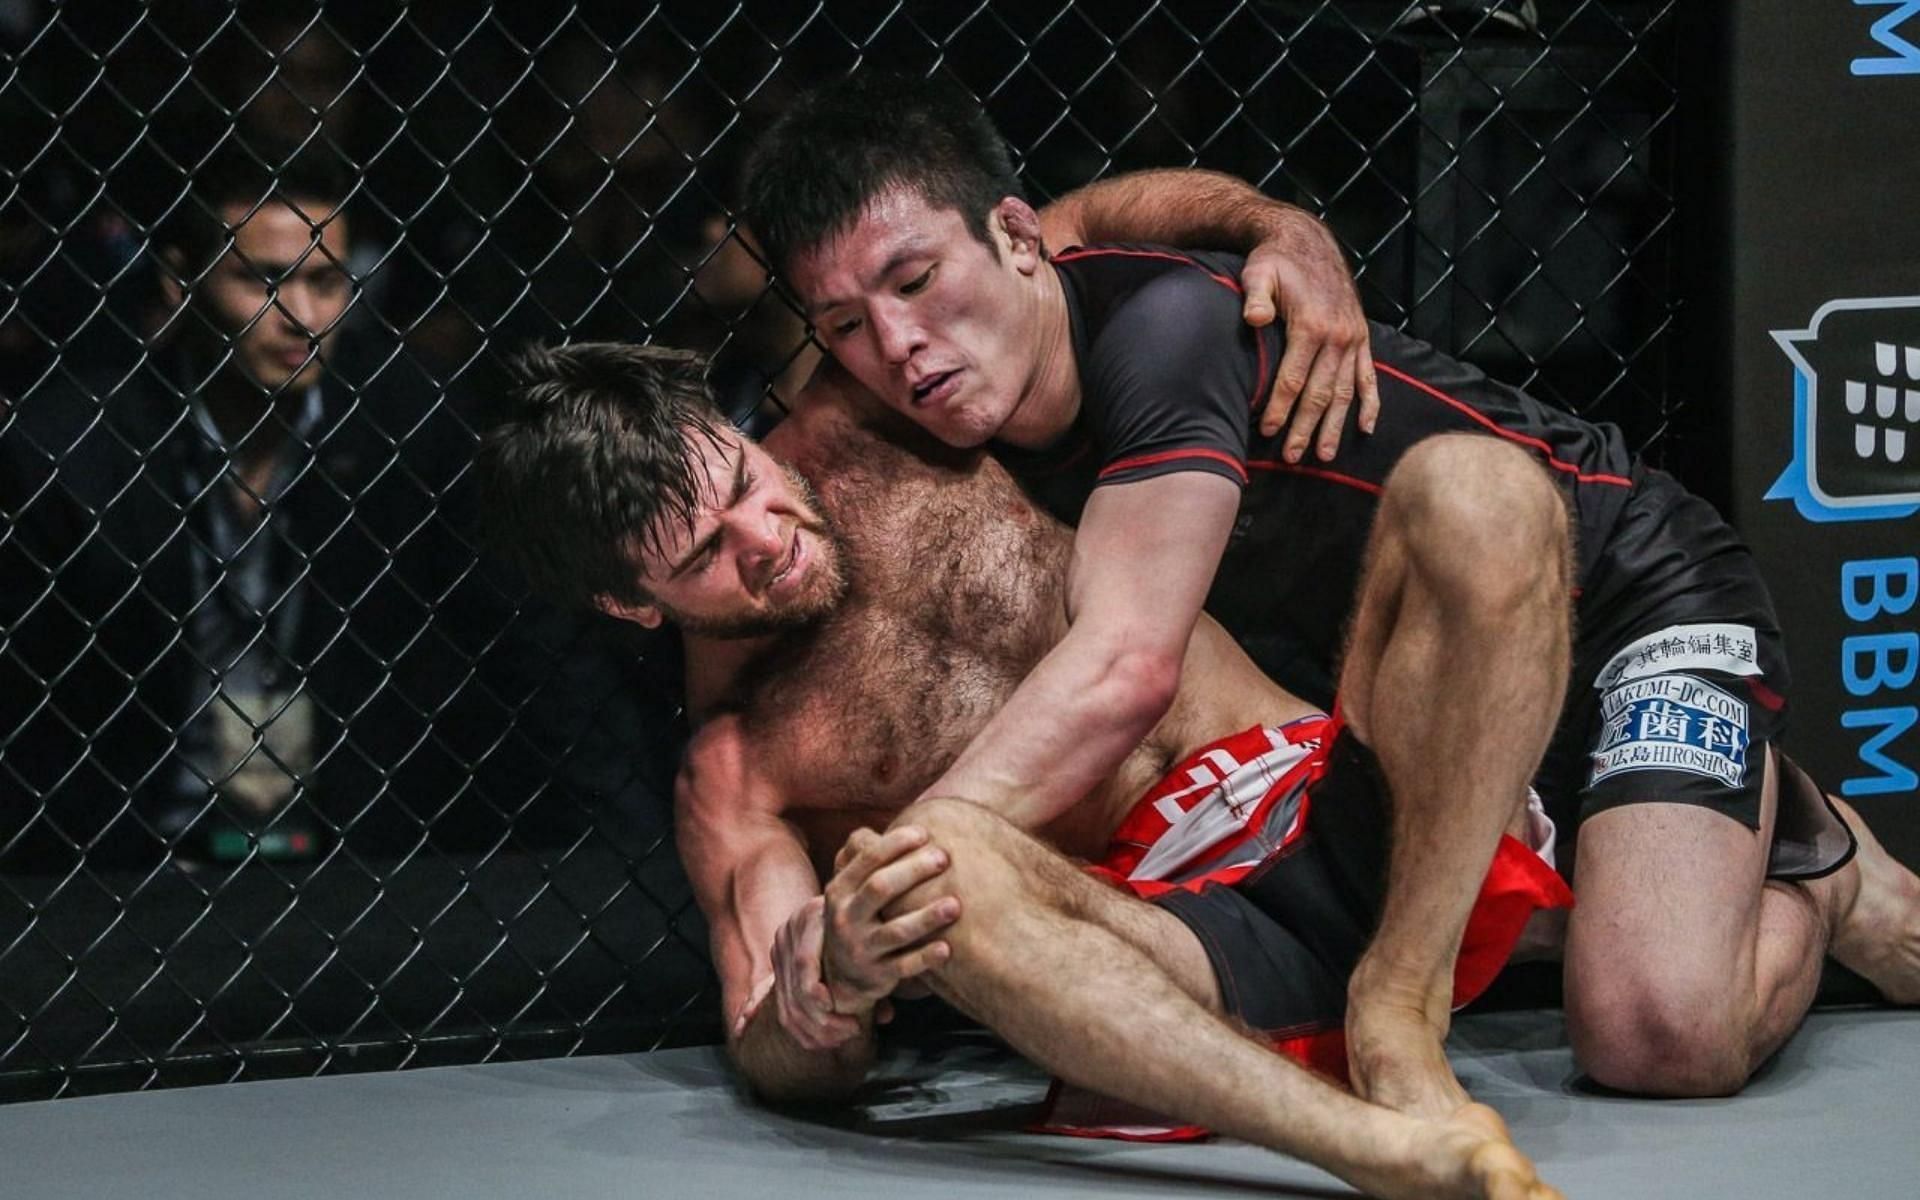 Former ONE featherweight champion Marat Gafurov (left) engaged in a submission grappling match against former ONE lightweight champ Shinya Aoki (right) back in 2018. (Image courtesy of ONE Championship)